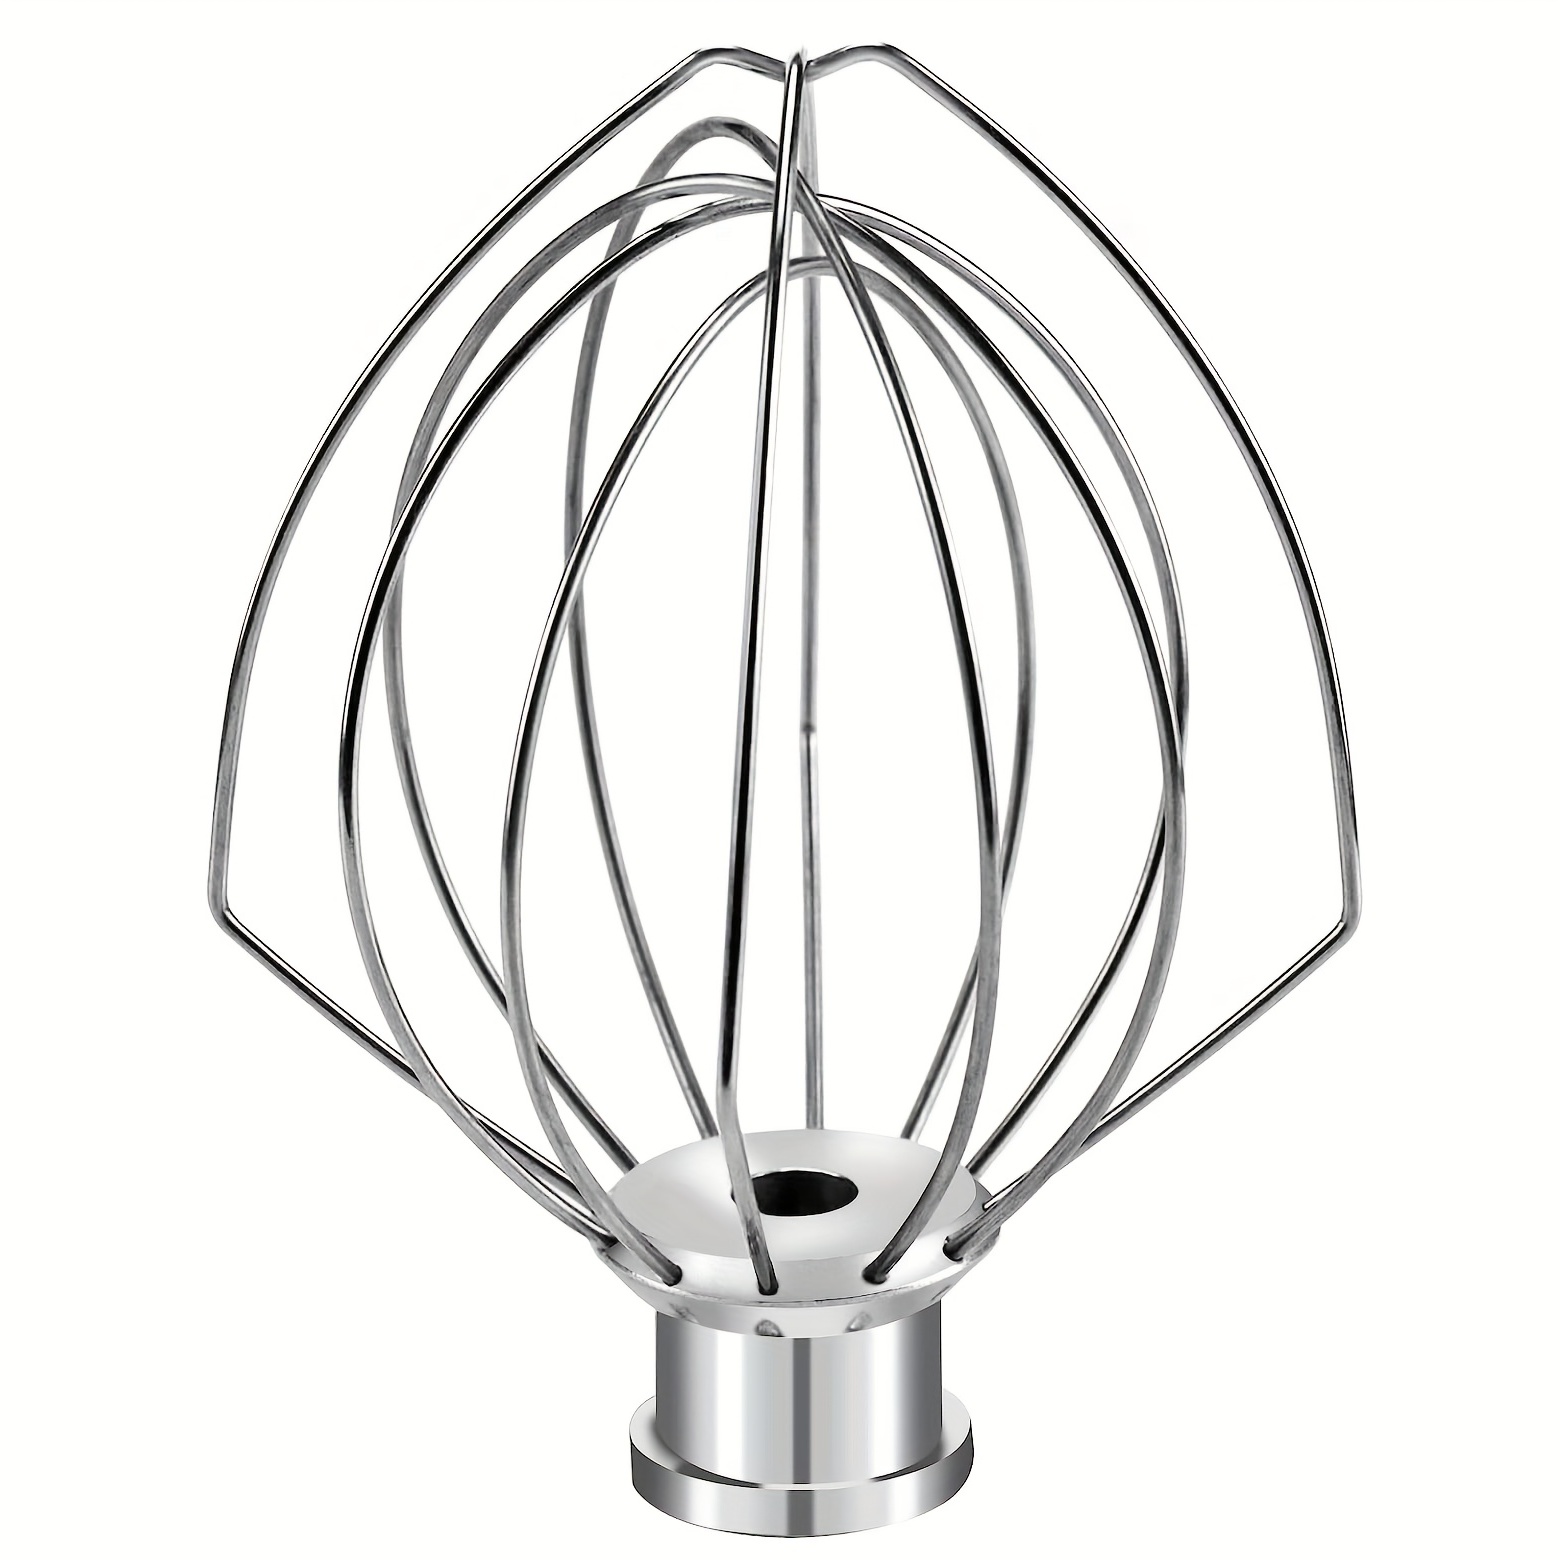 K45WW Stainless Steel Wire Whip for KitchenAid Artisan Series Tilt-Head  Mixer 5 Quart Bowl, 6 Wire whisk Fits for Artisan Mixer, Heavy Duty